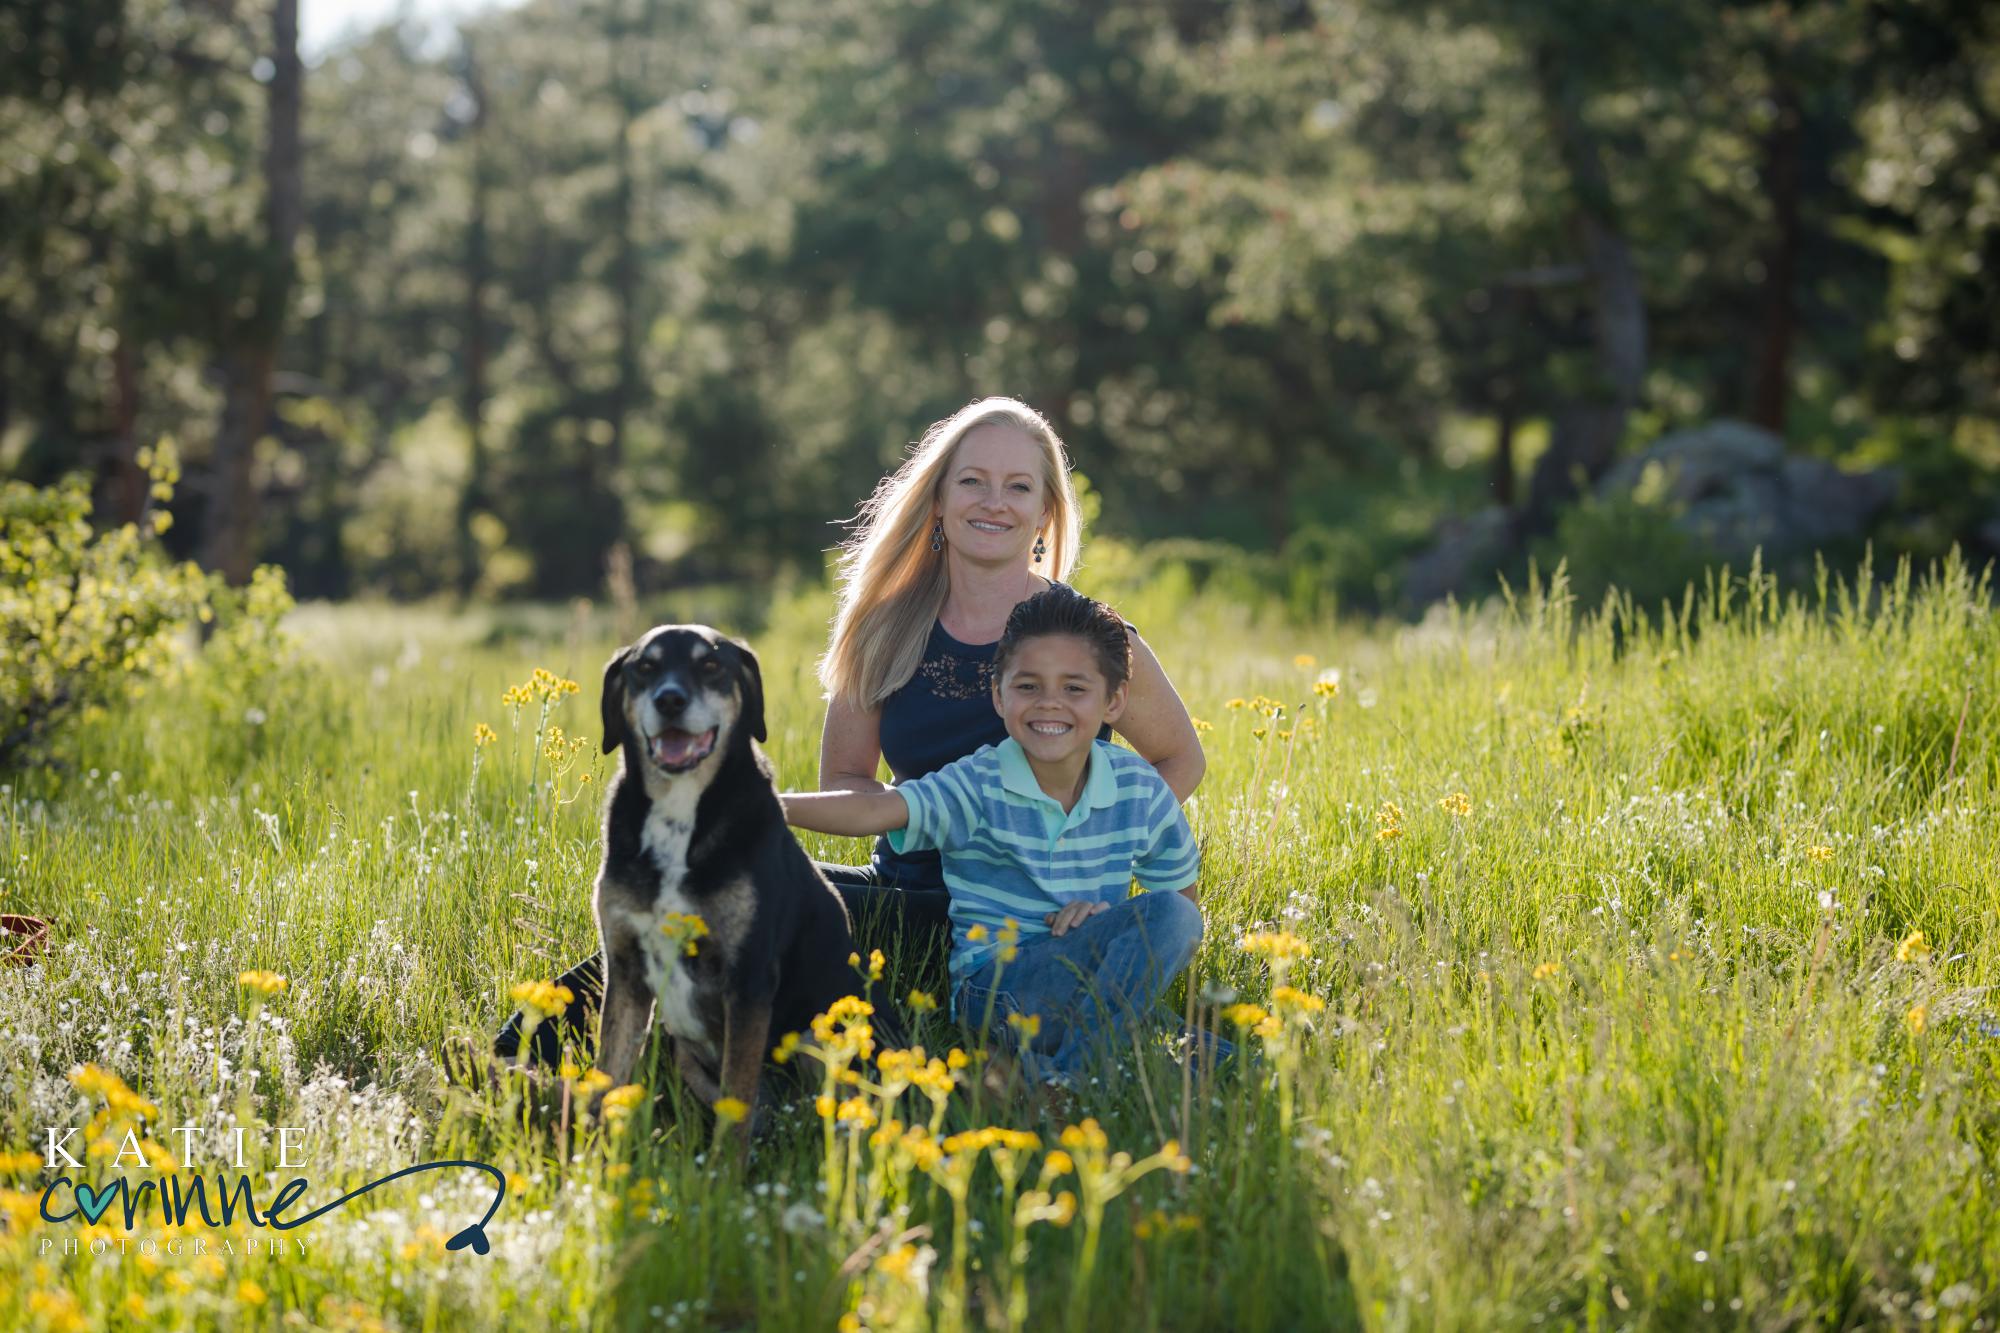 Family poses for summer photos in a field